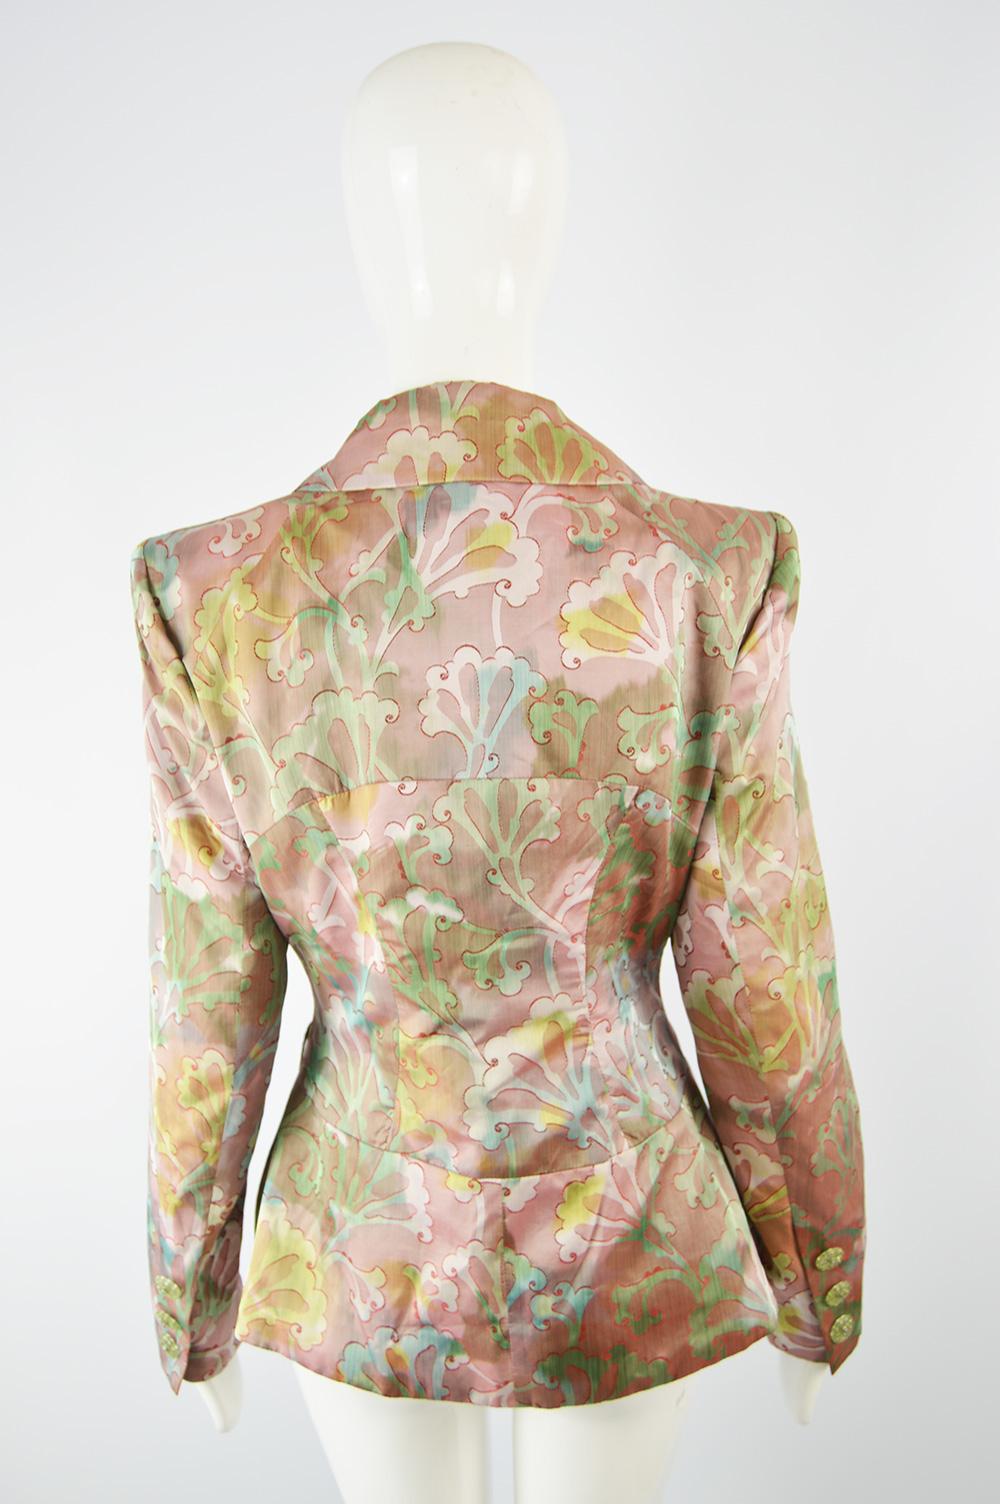 Christian Lacroix 1990s Multicolored Taffeta Tailored Evening Party Jacket For Sale 2